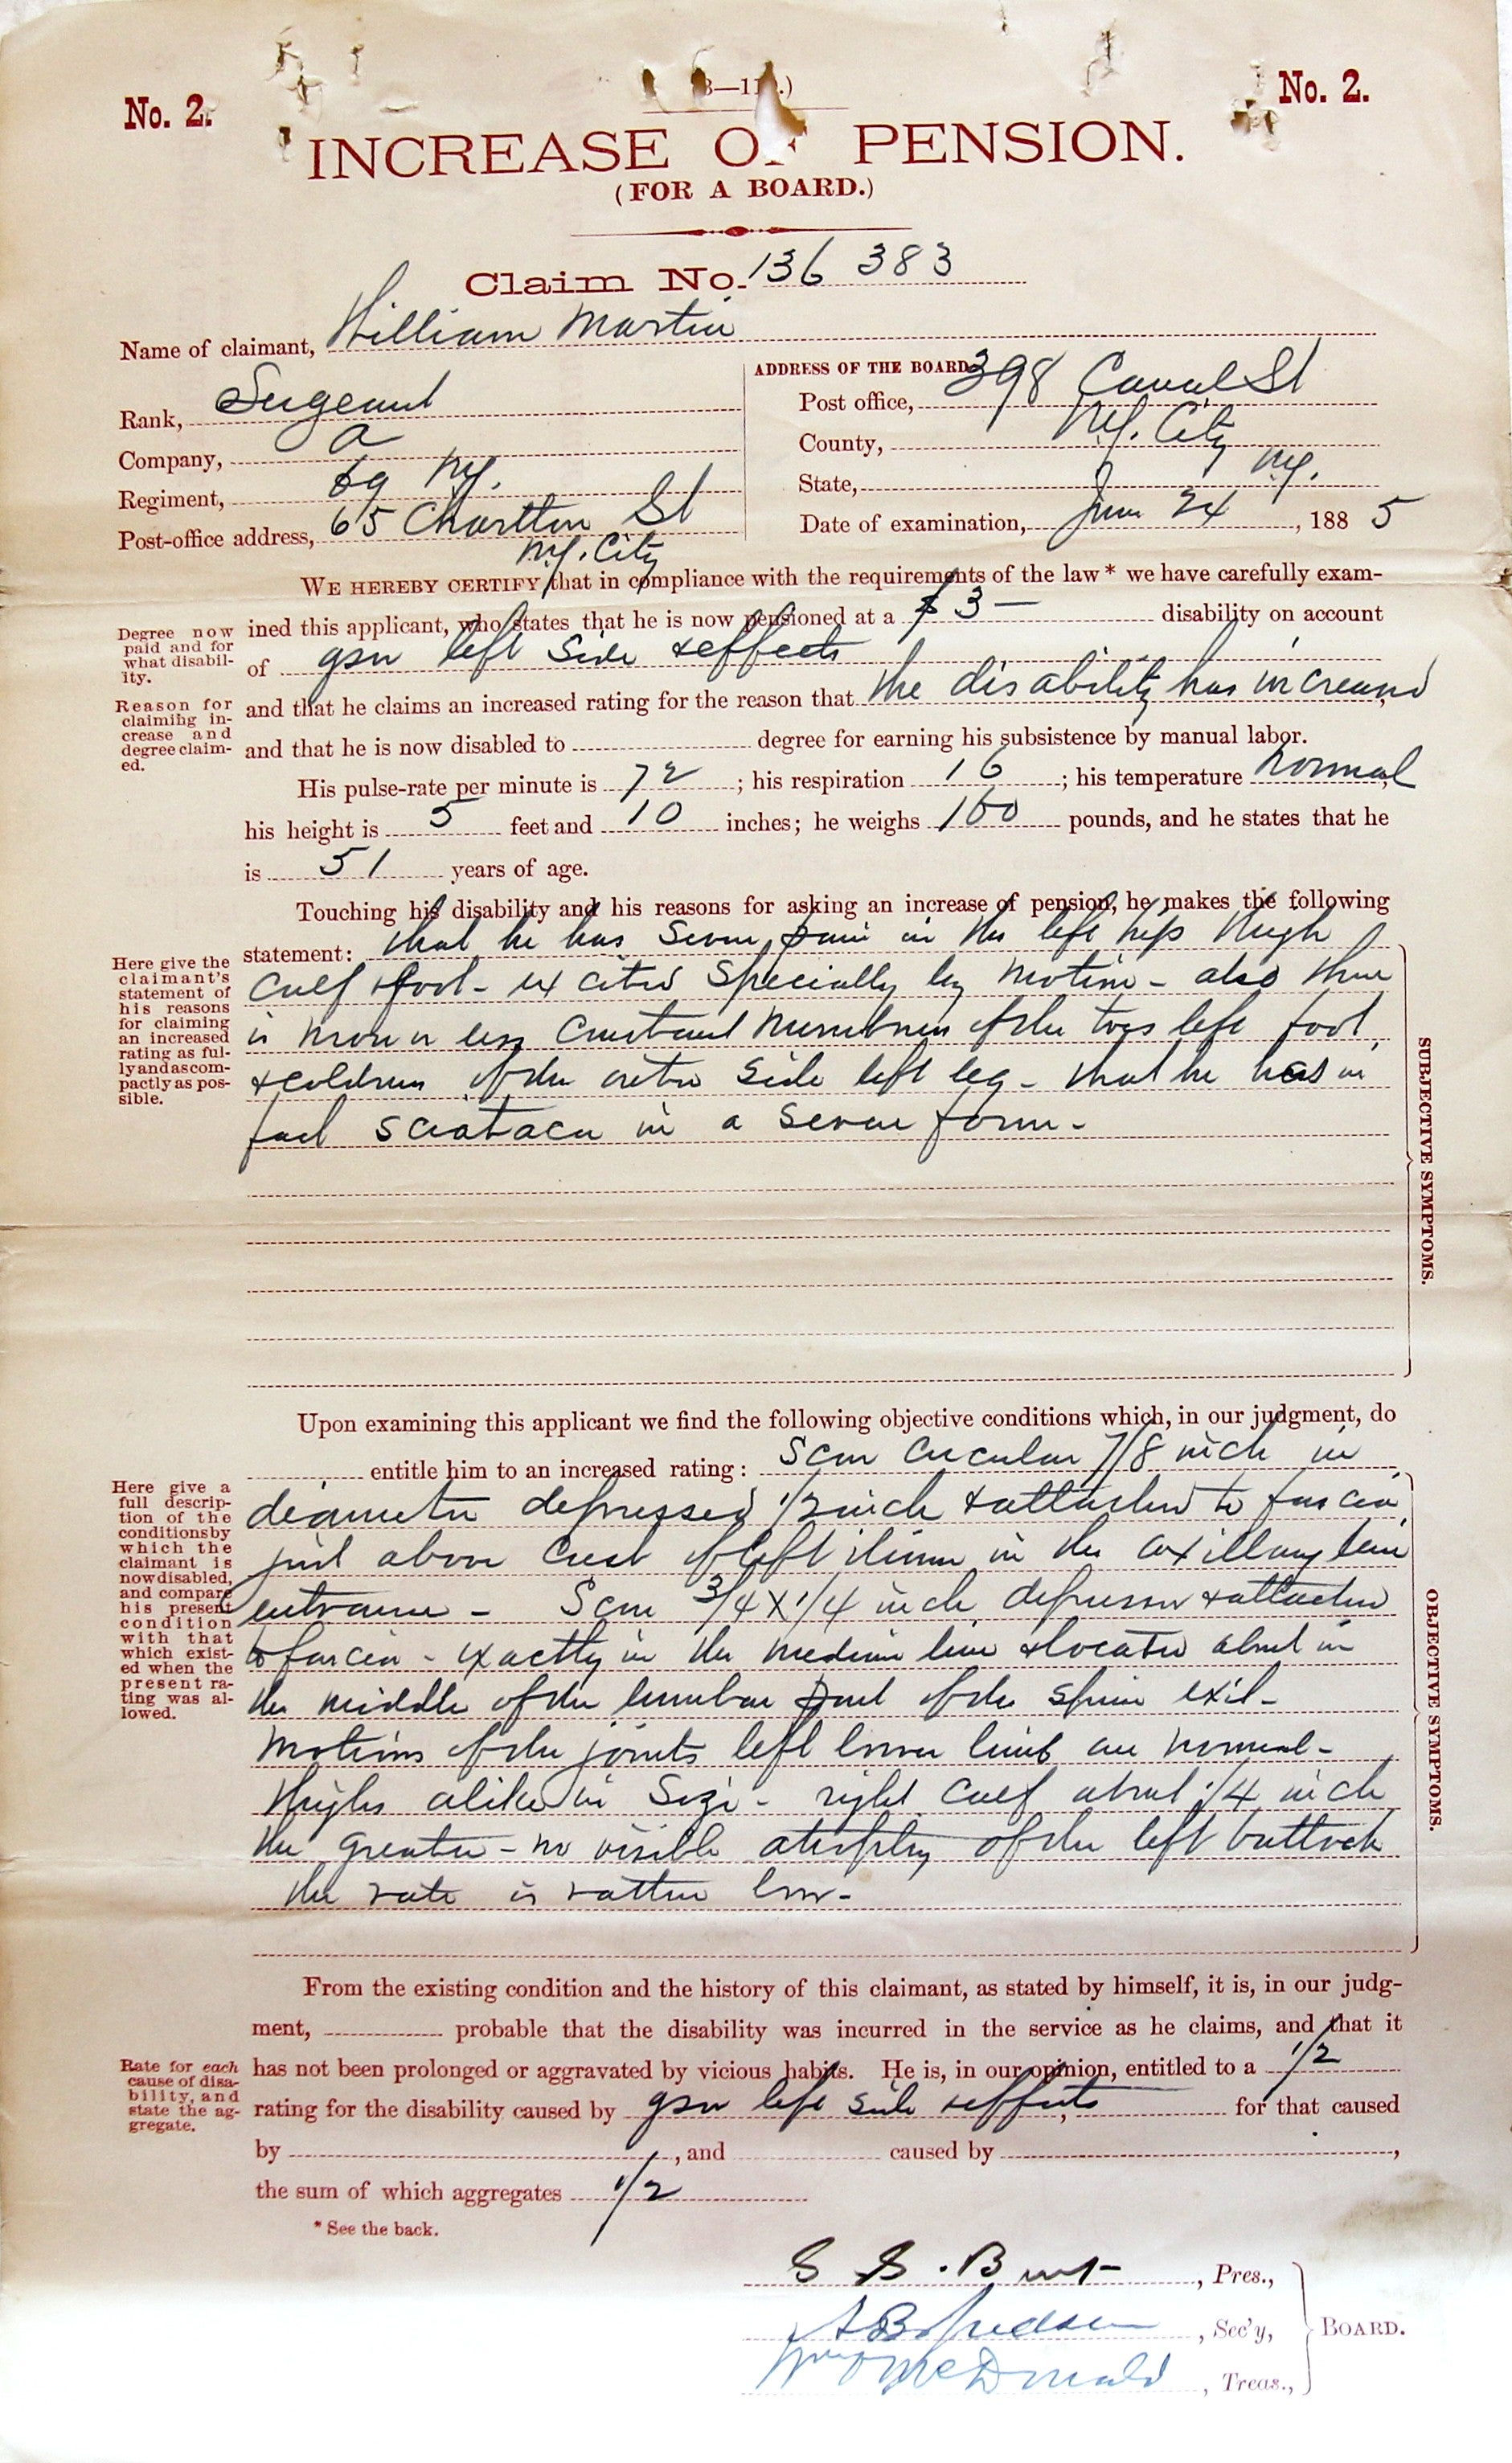 Image of a surgeon's certificate for William Martin's 1885 pension application